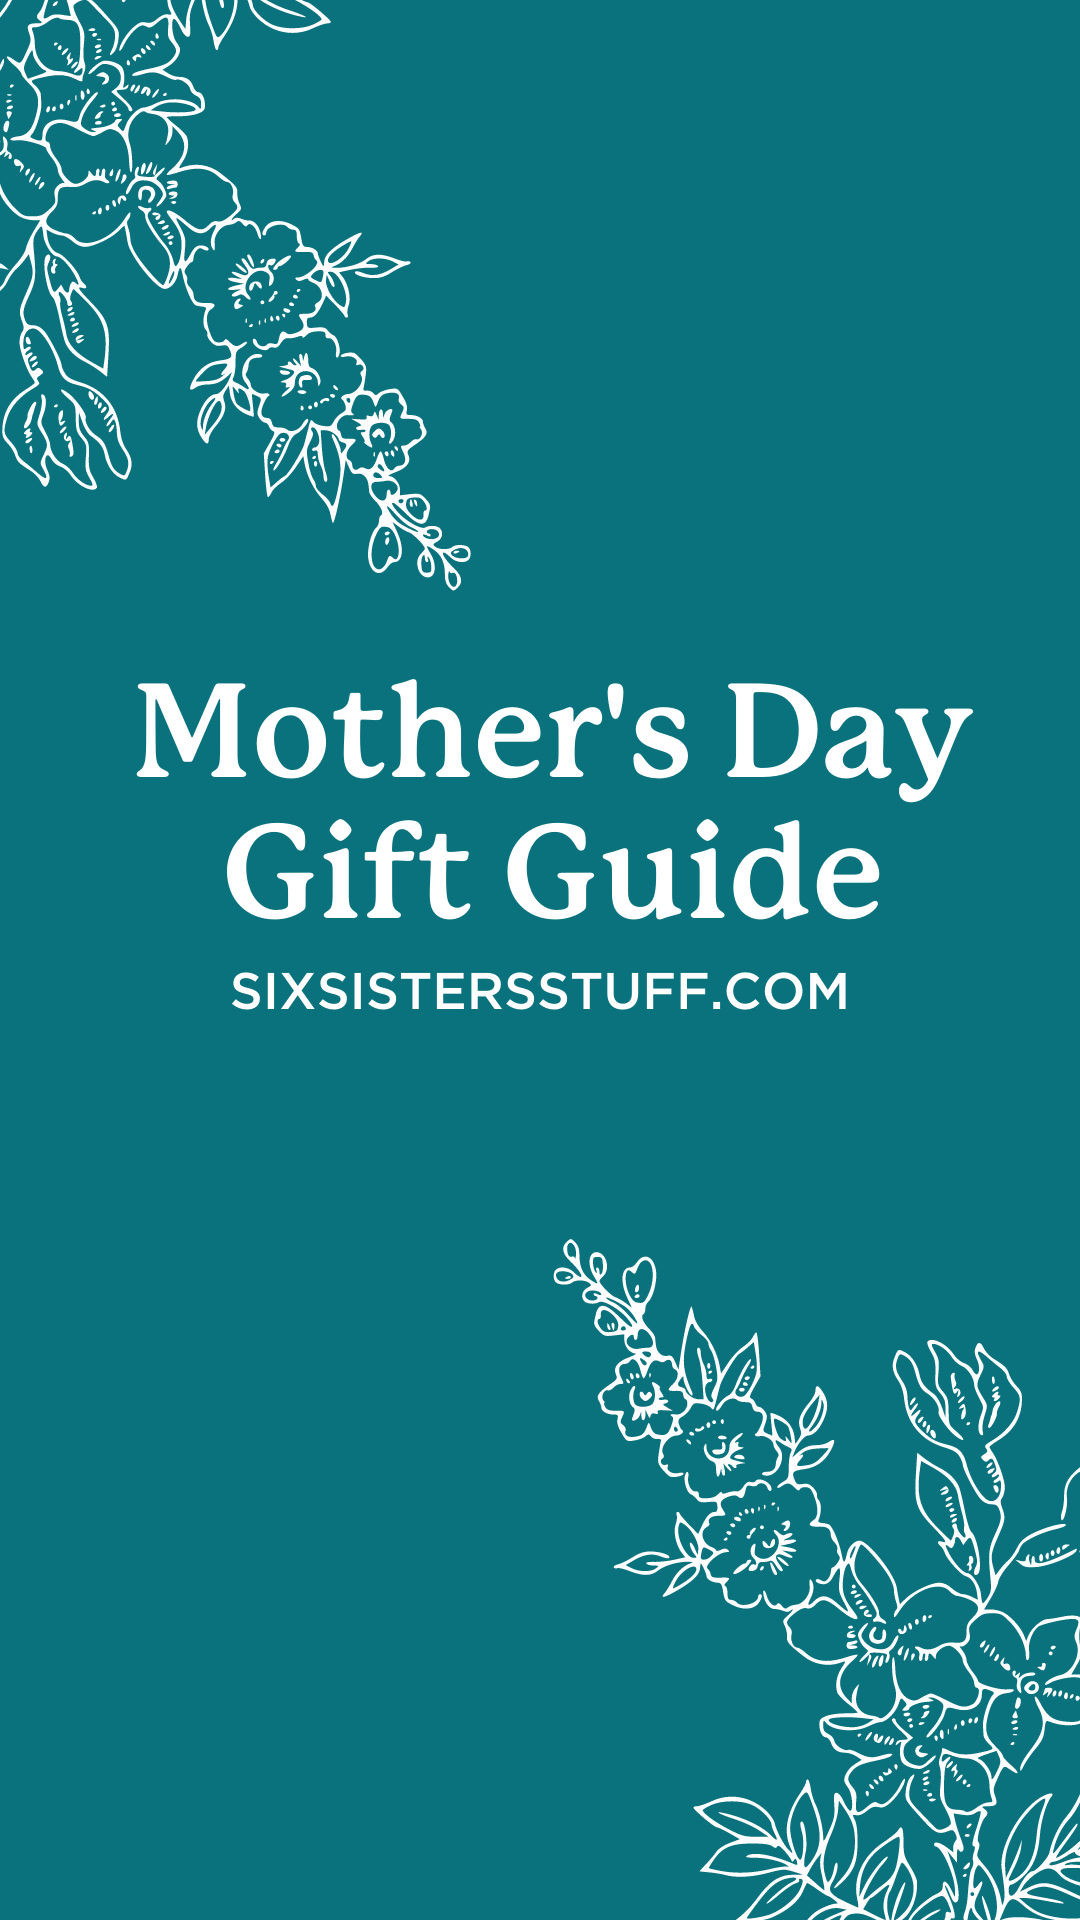 Mother’s Day Gift Guide – Best Gifts for Moms